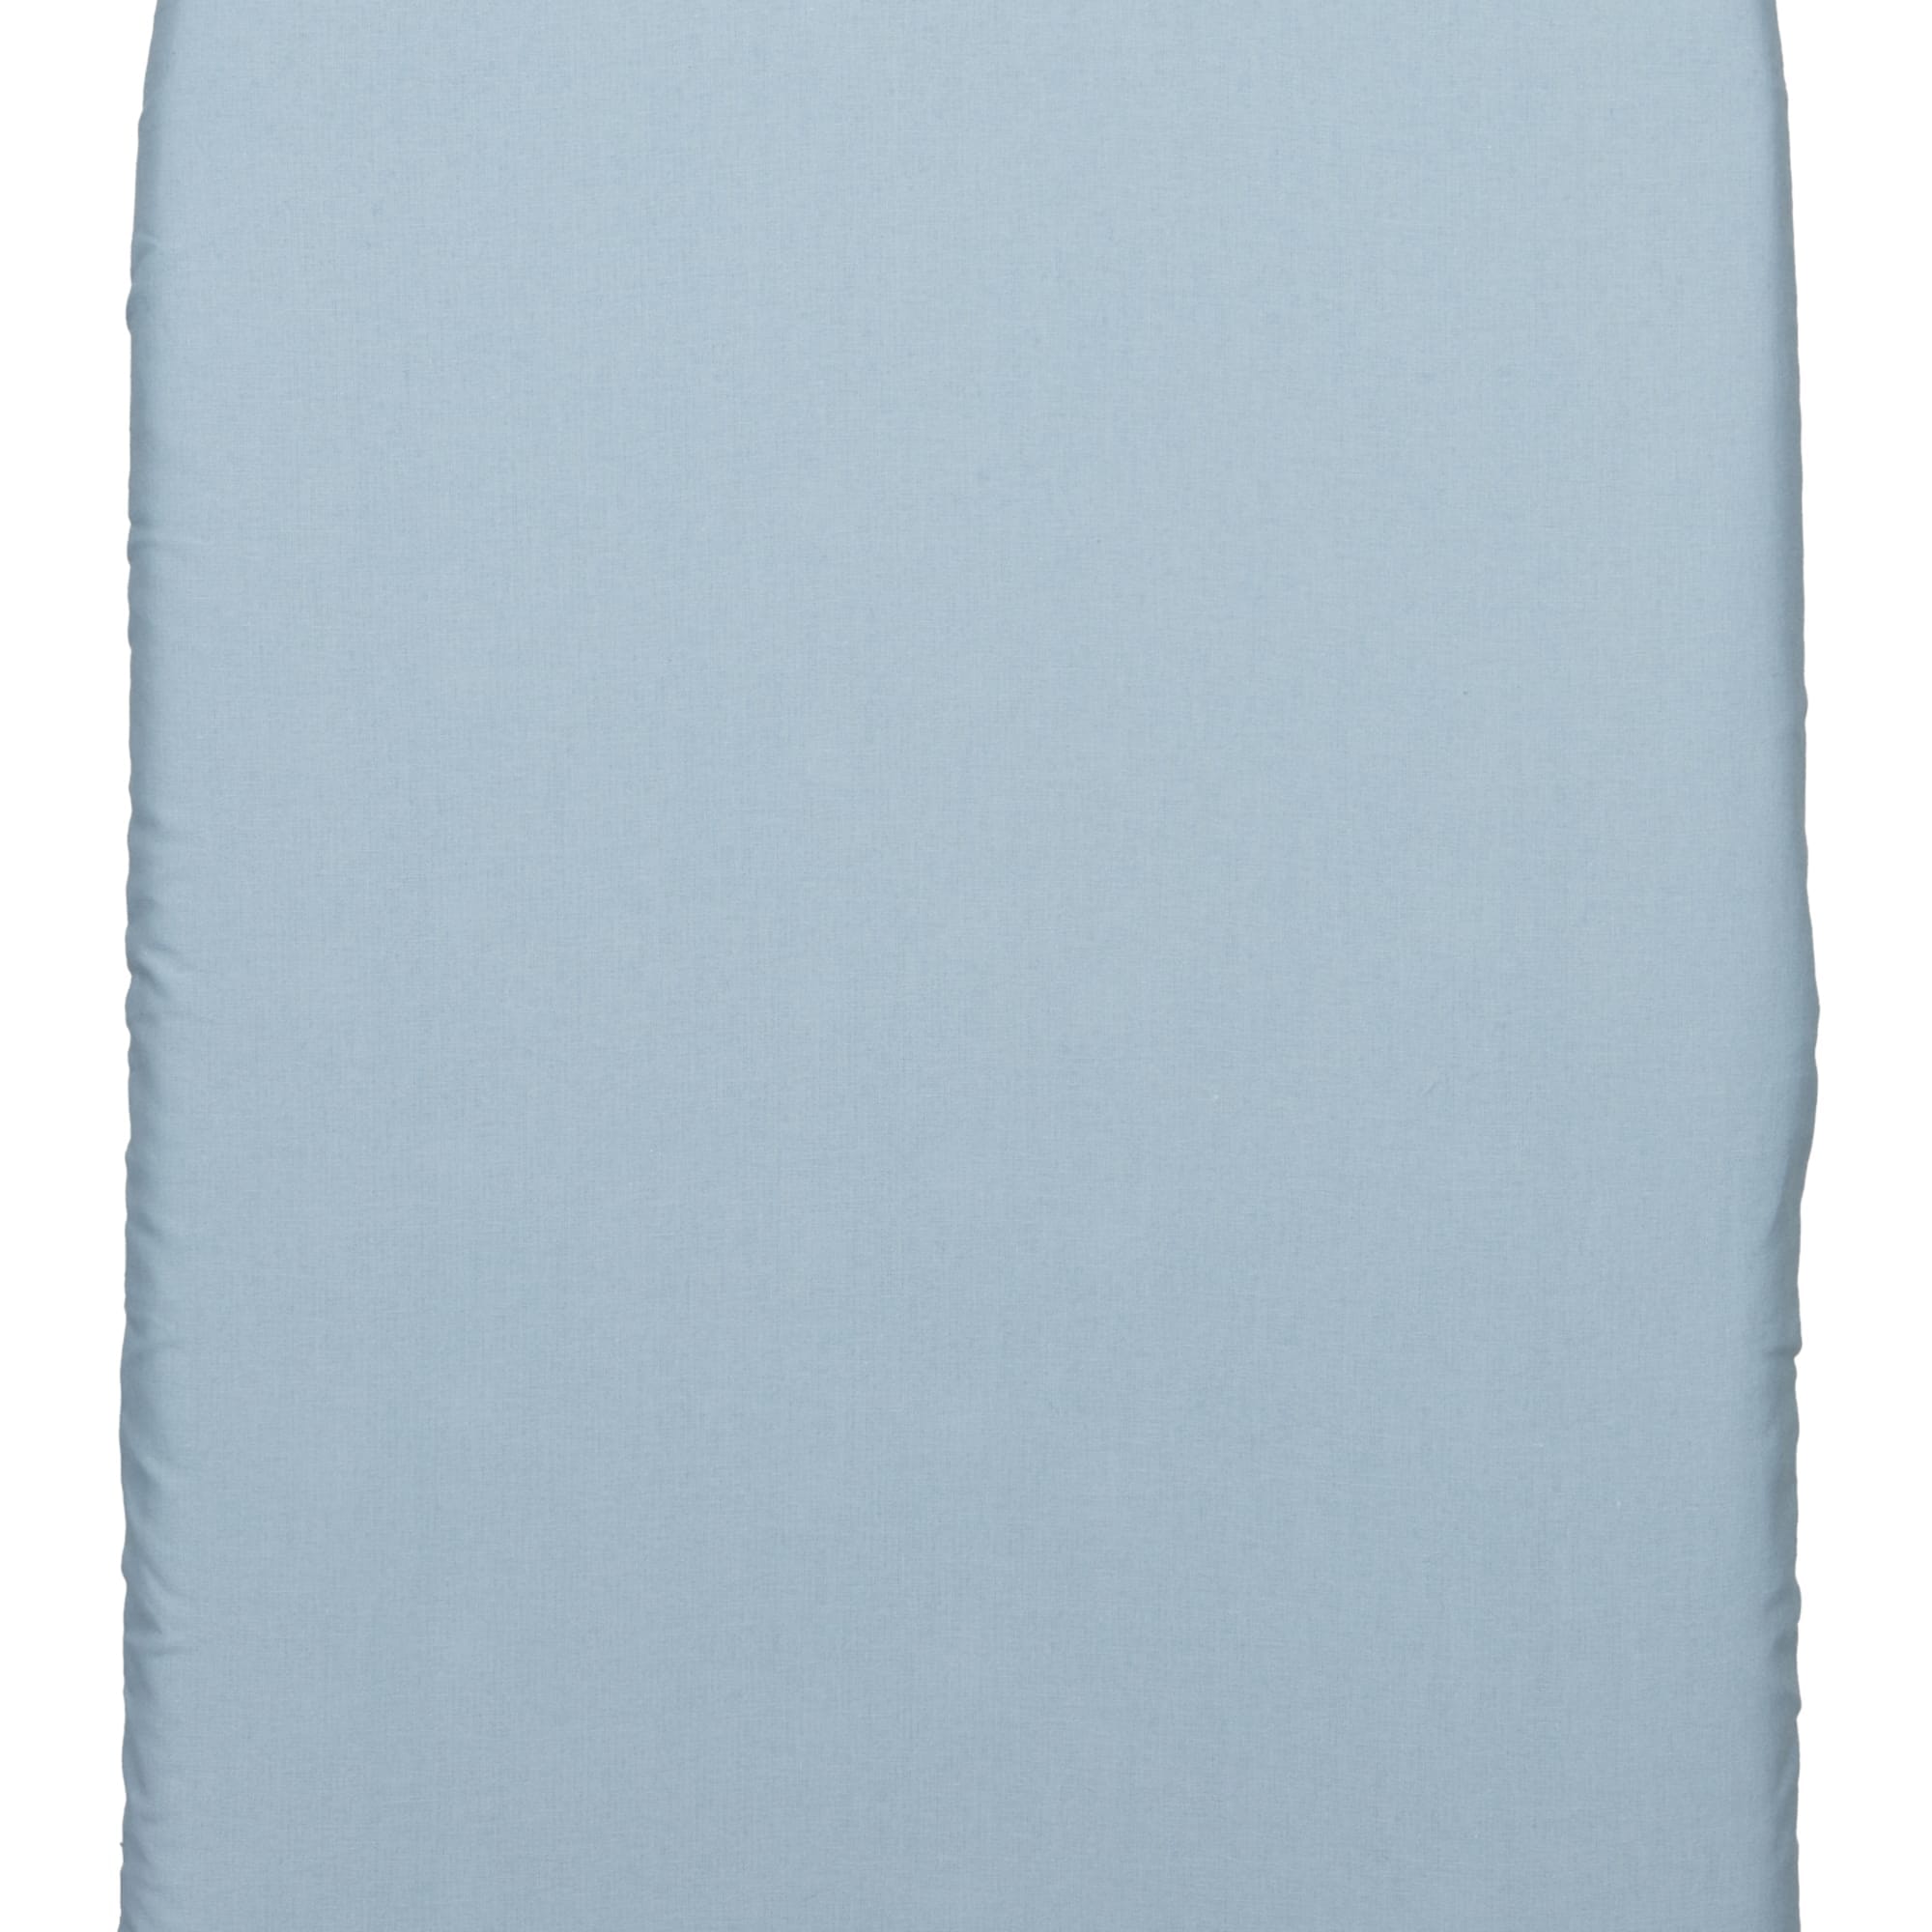 Seymour Home Products Premium Replacement Cover and Pad, Light Solid Blue, Fits 53"-54" X 13"-14" $8.00 EACH, CASE PACK OF 6